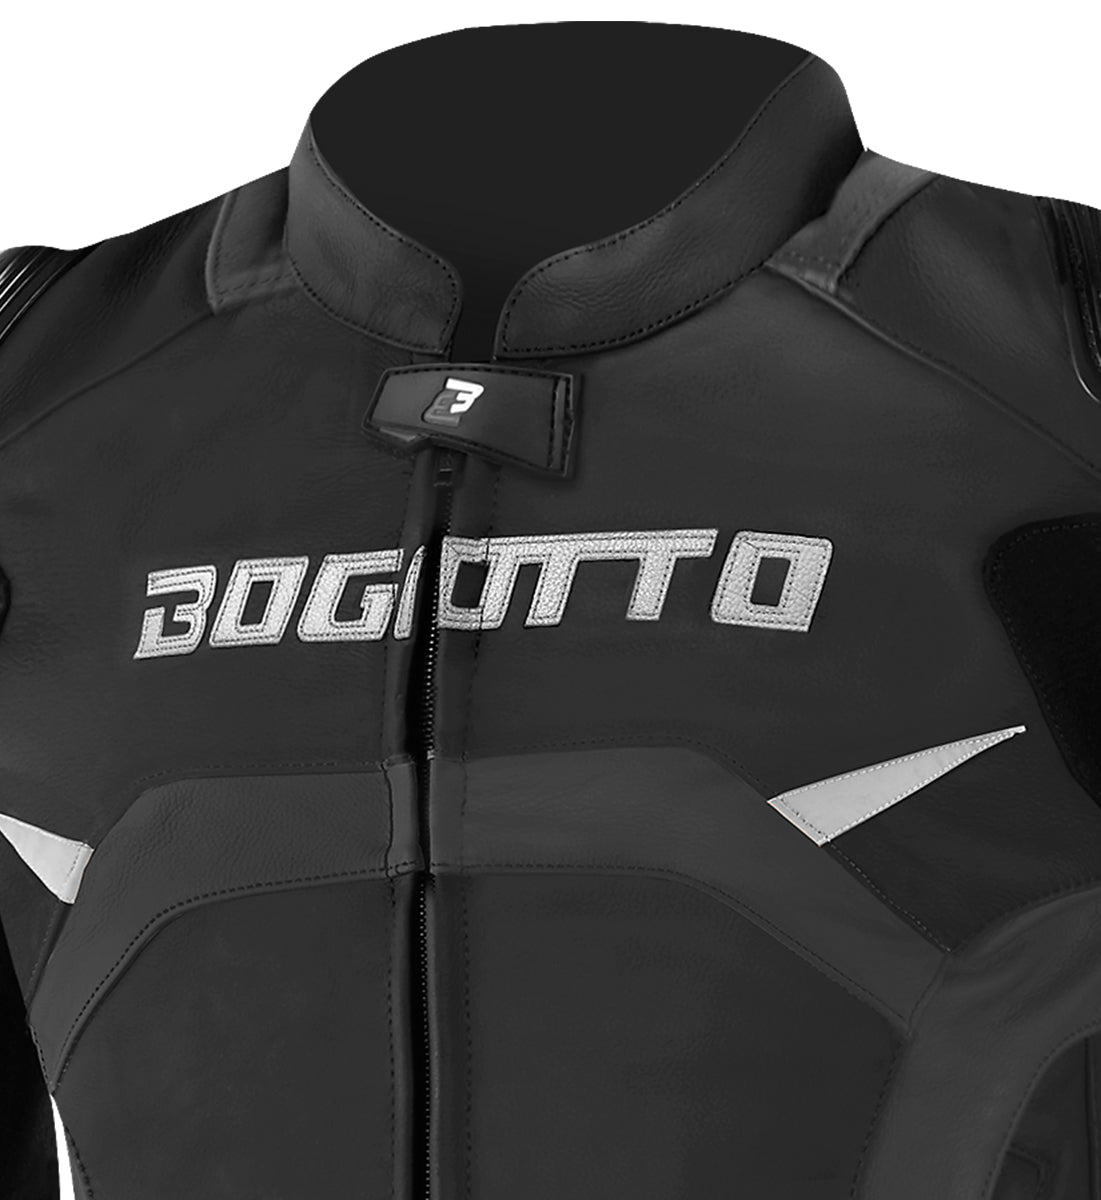 Bogotto Misano Two Piece Motorcycle Leather Suit#color_black-grey